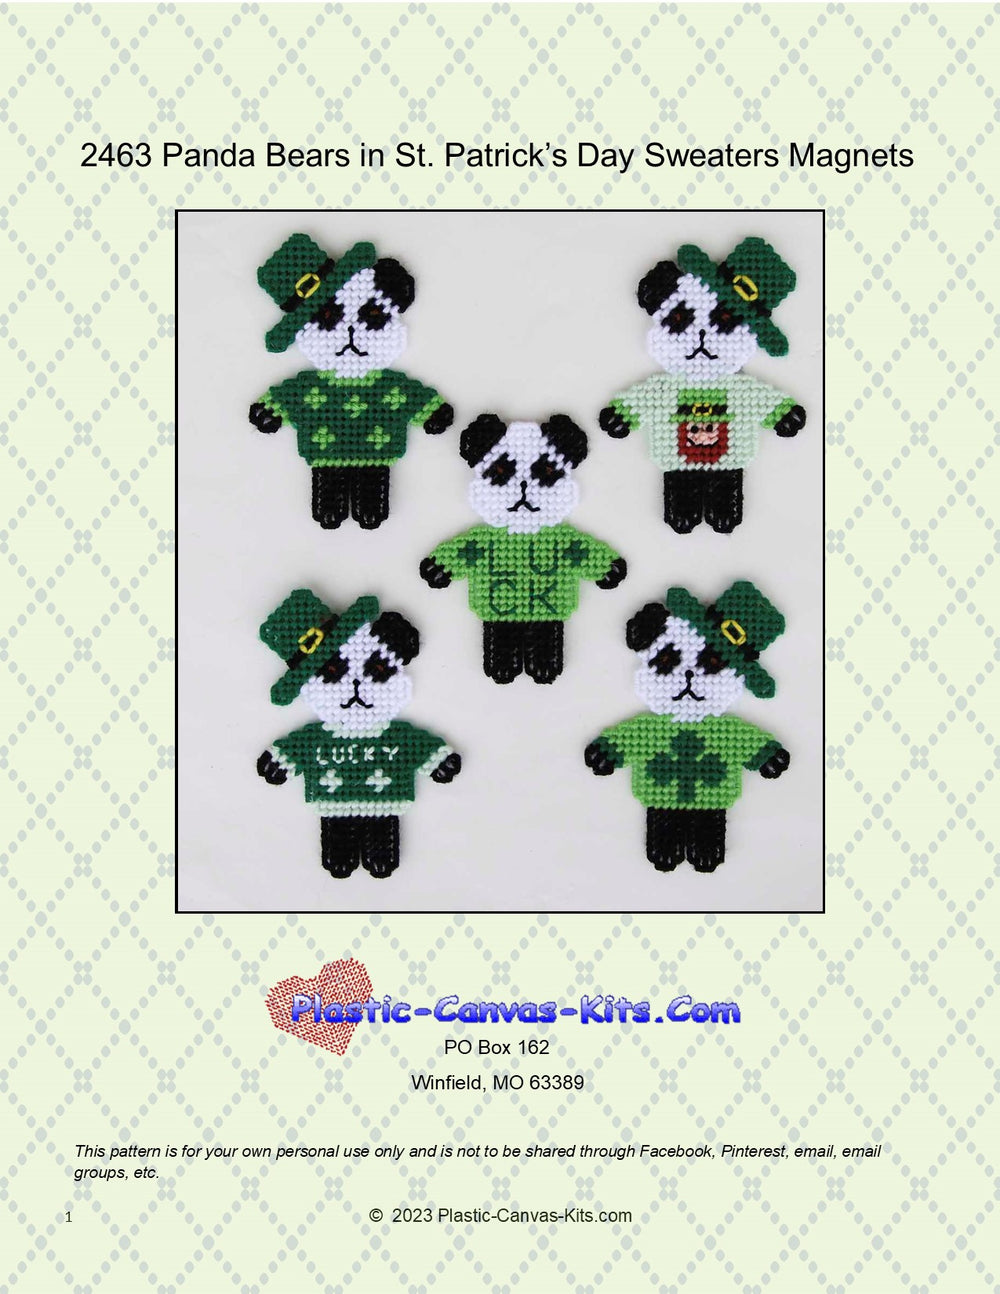 Panda Bears in St. Patrick's Day Sweaters Magnets